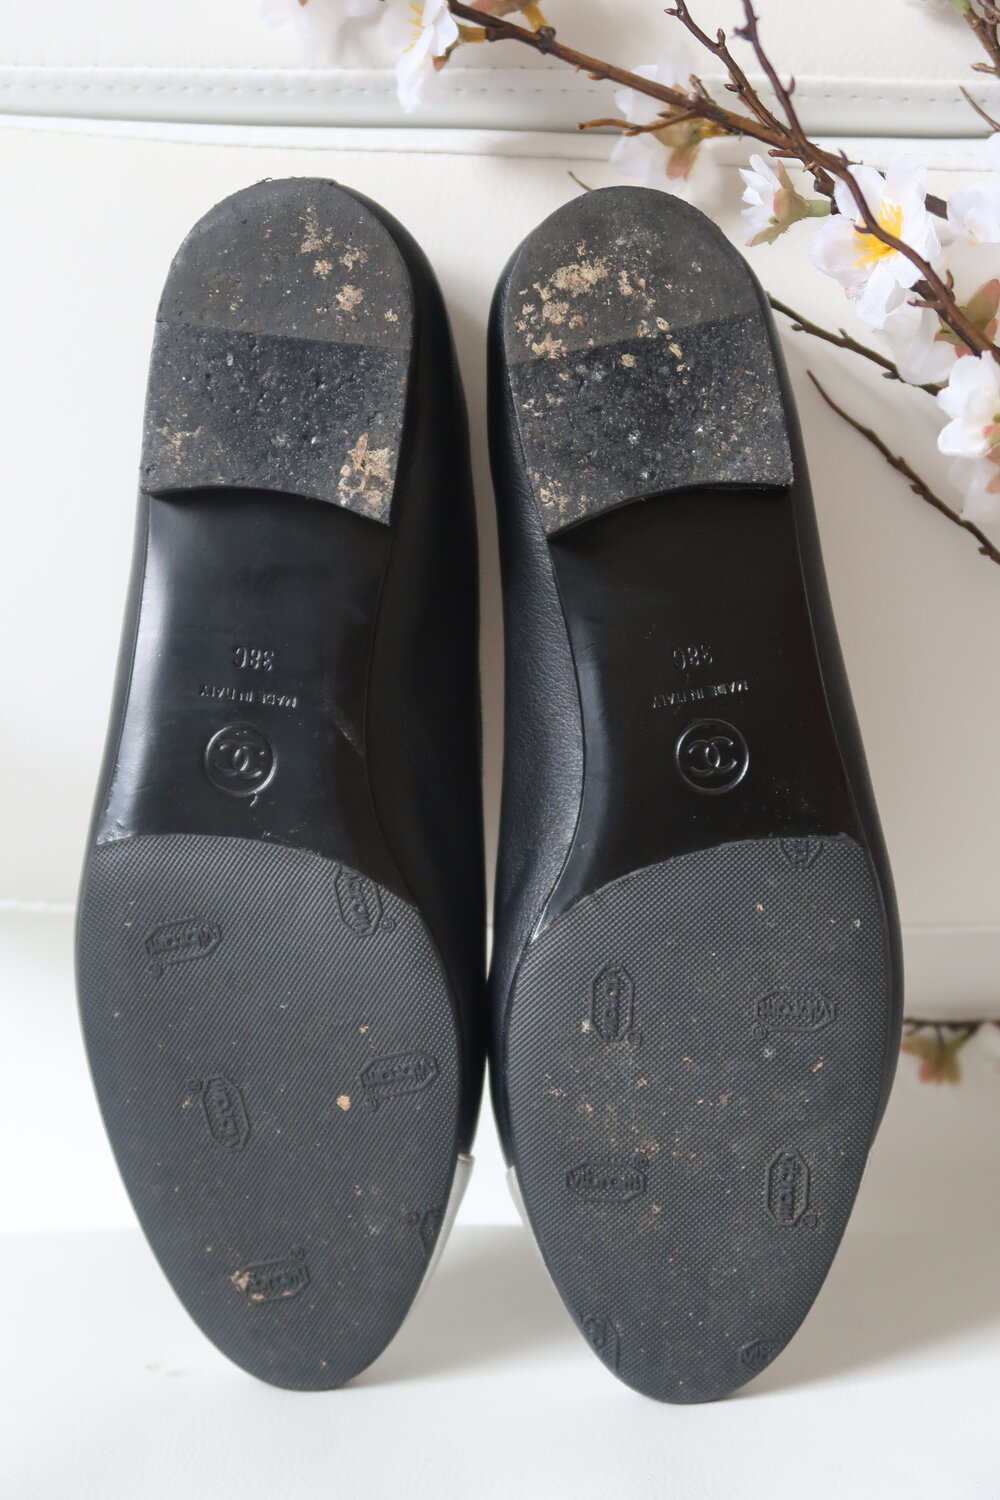 Chanel Black Leather & Silver Toe Cap Ballet Flats, Size 38 — Blaise Ruby  Loves